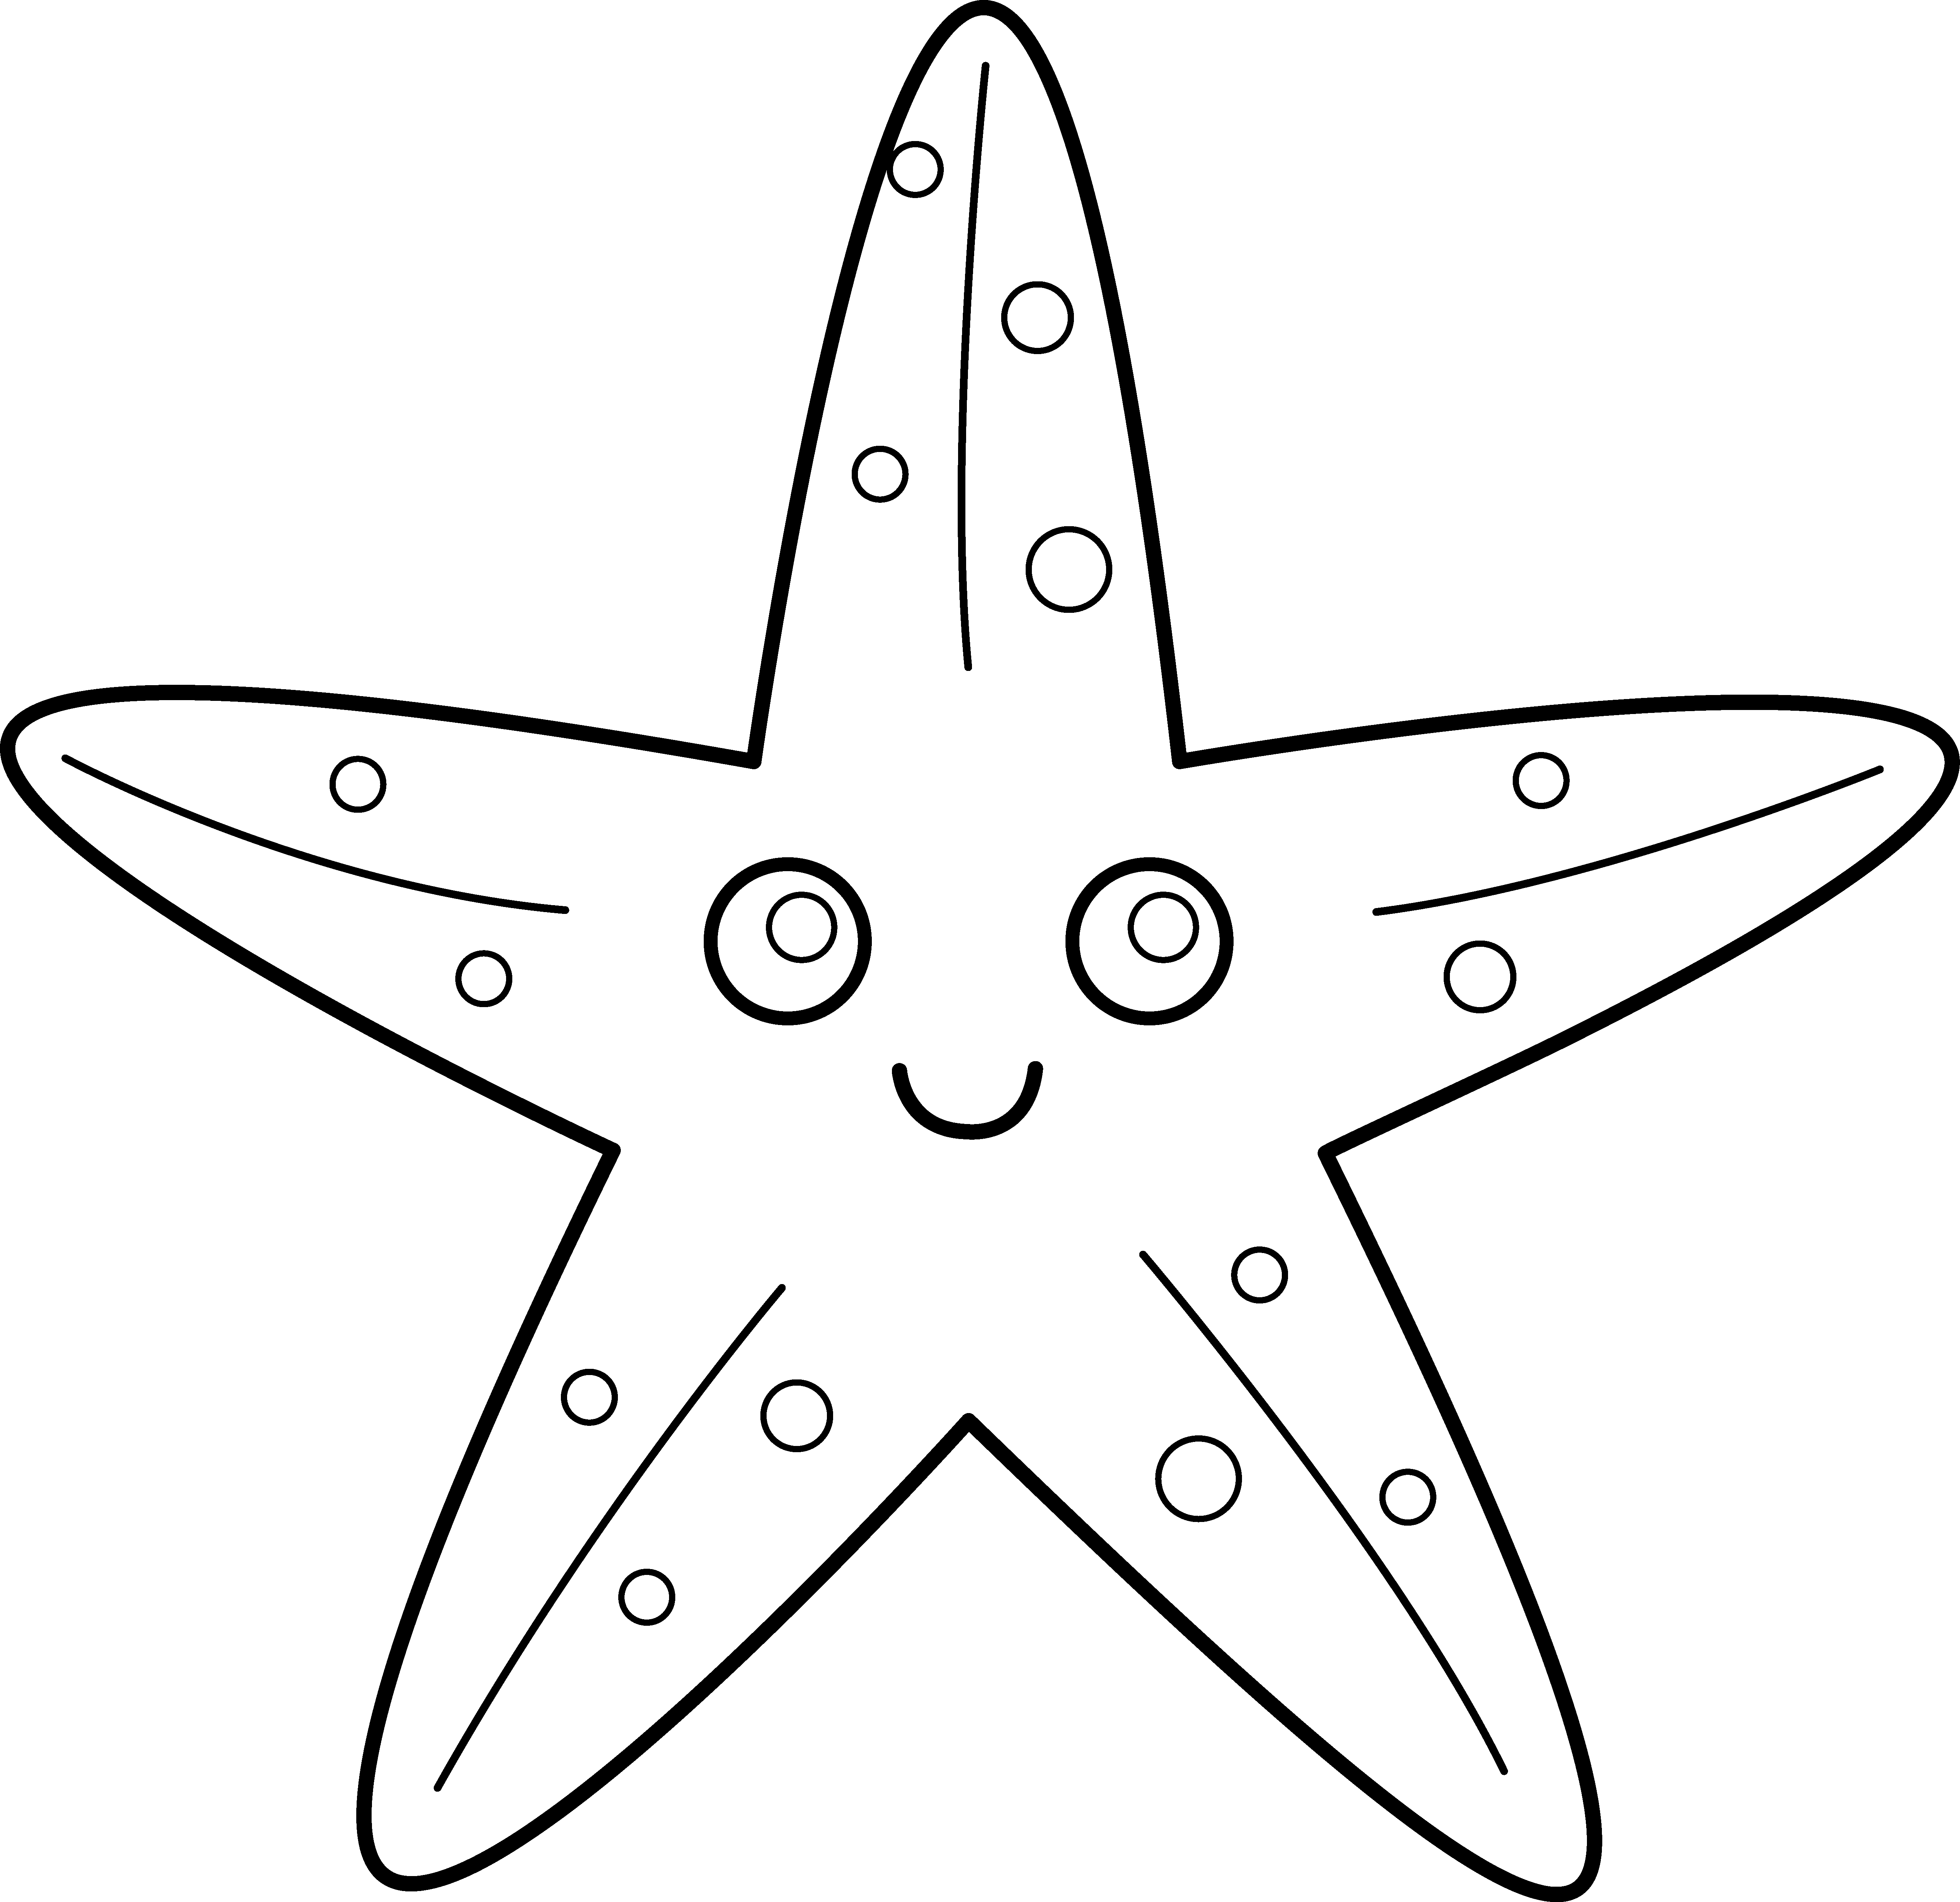 Pix For > Starfish Vector Outline